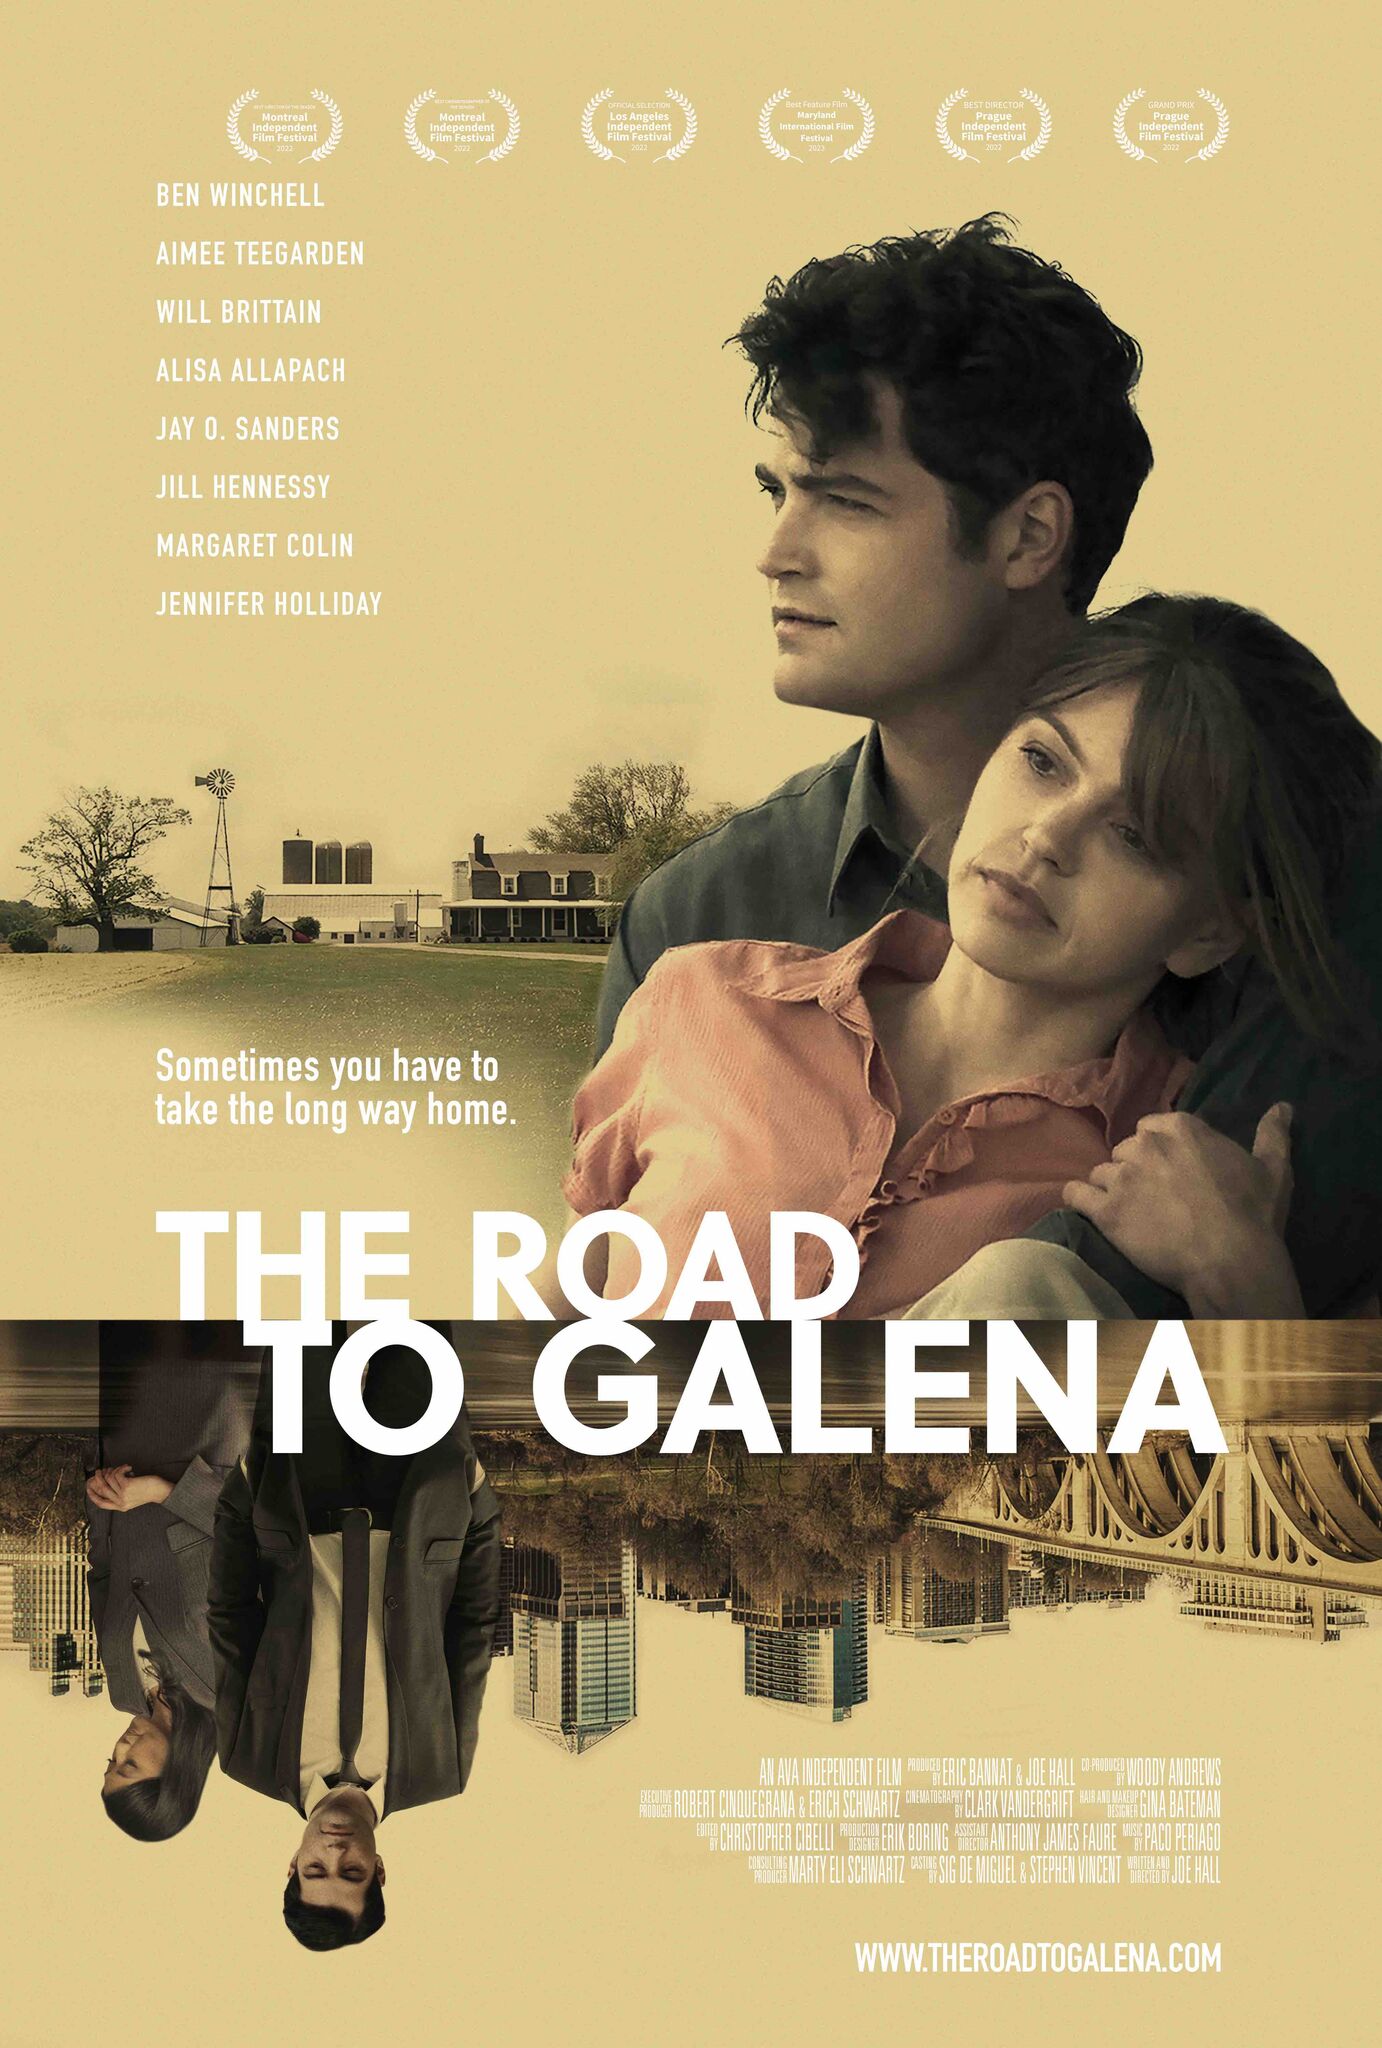 "The Road To Galena"